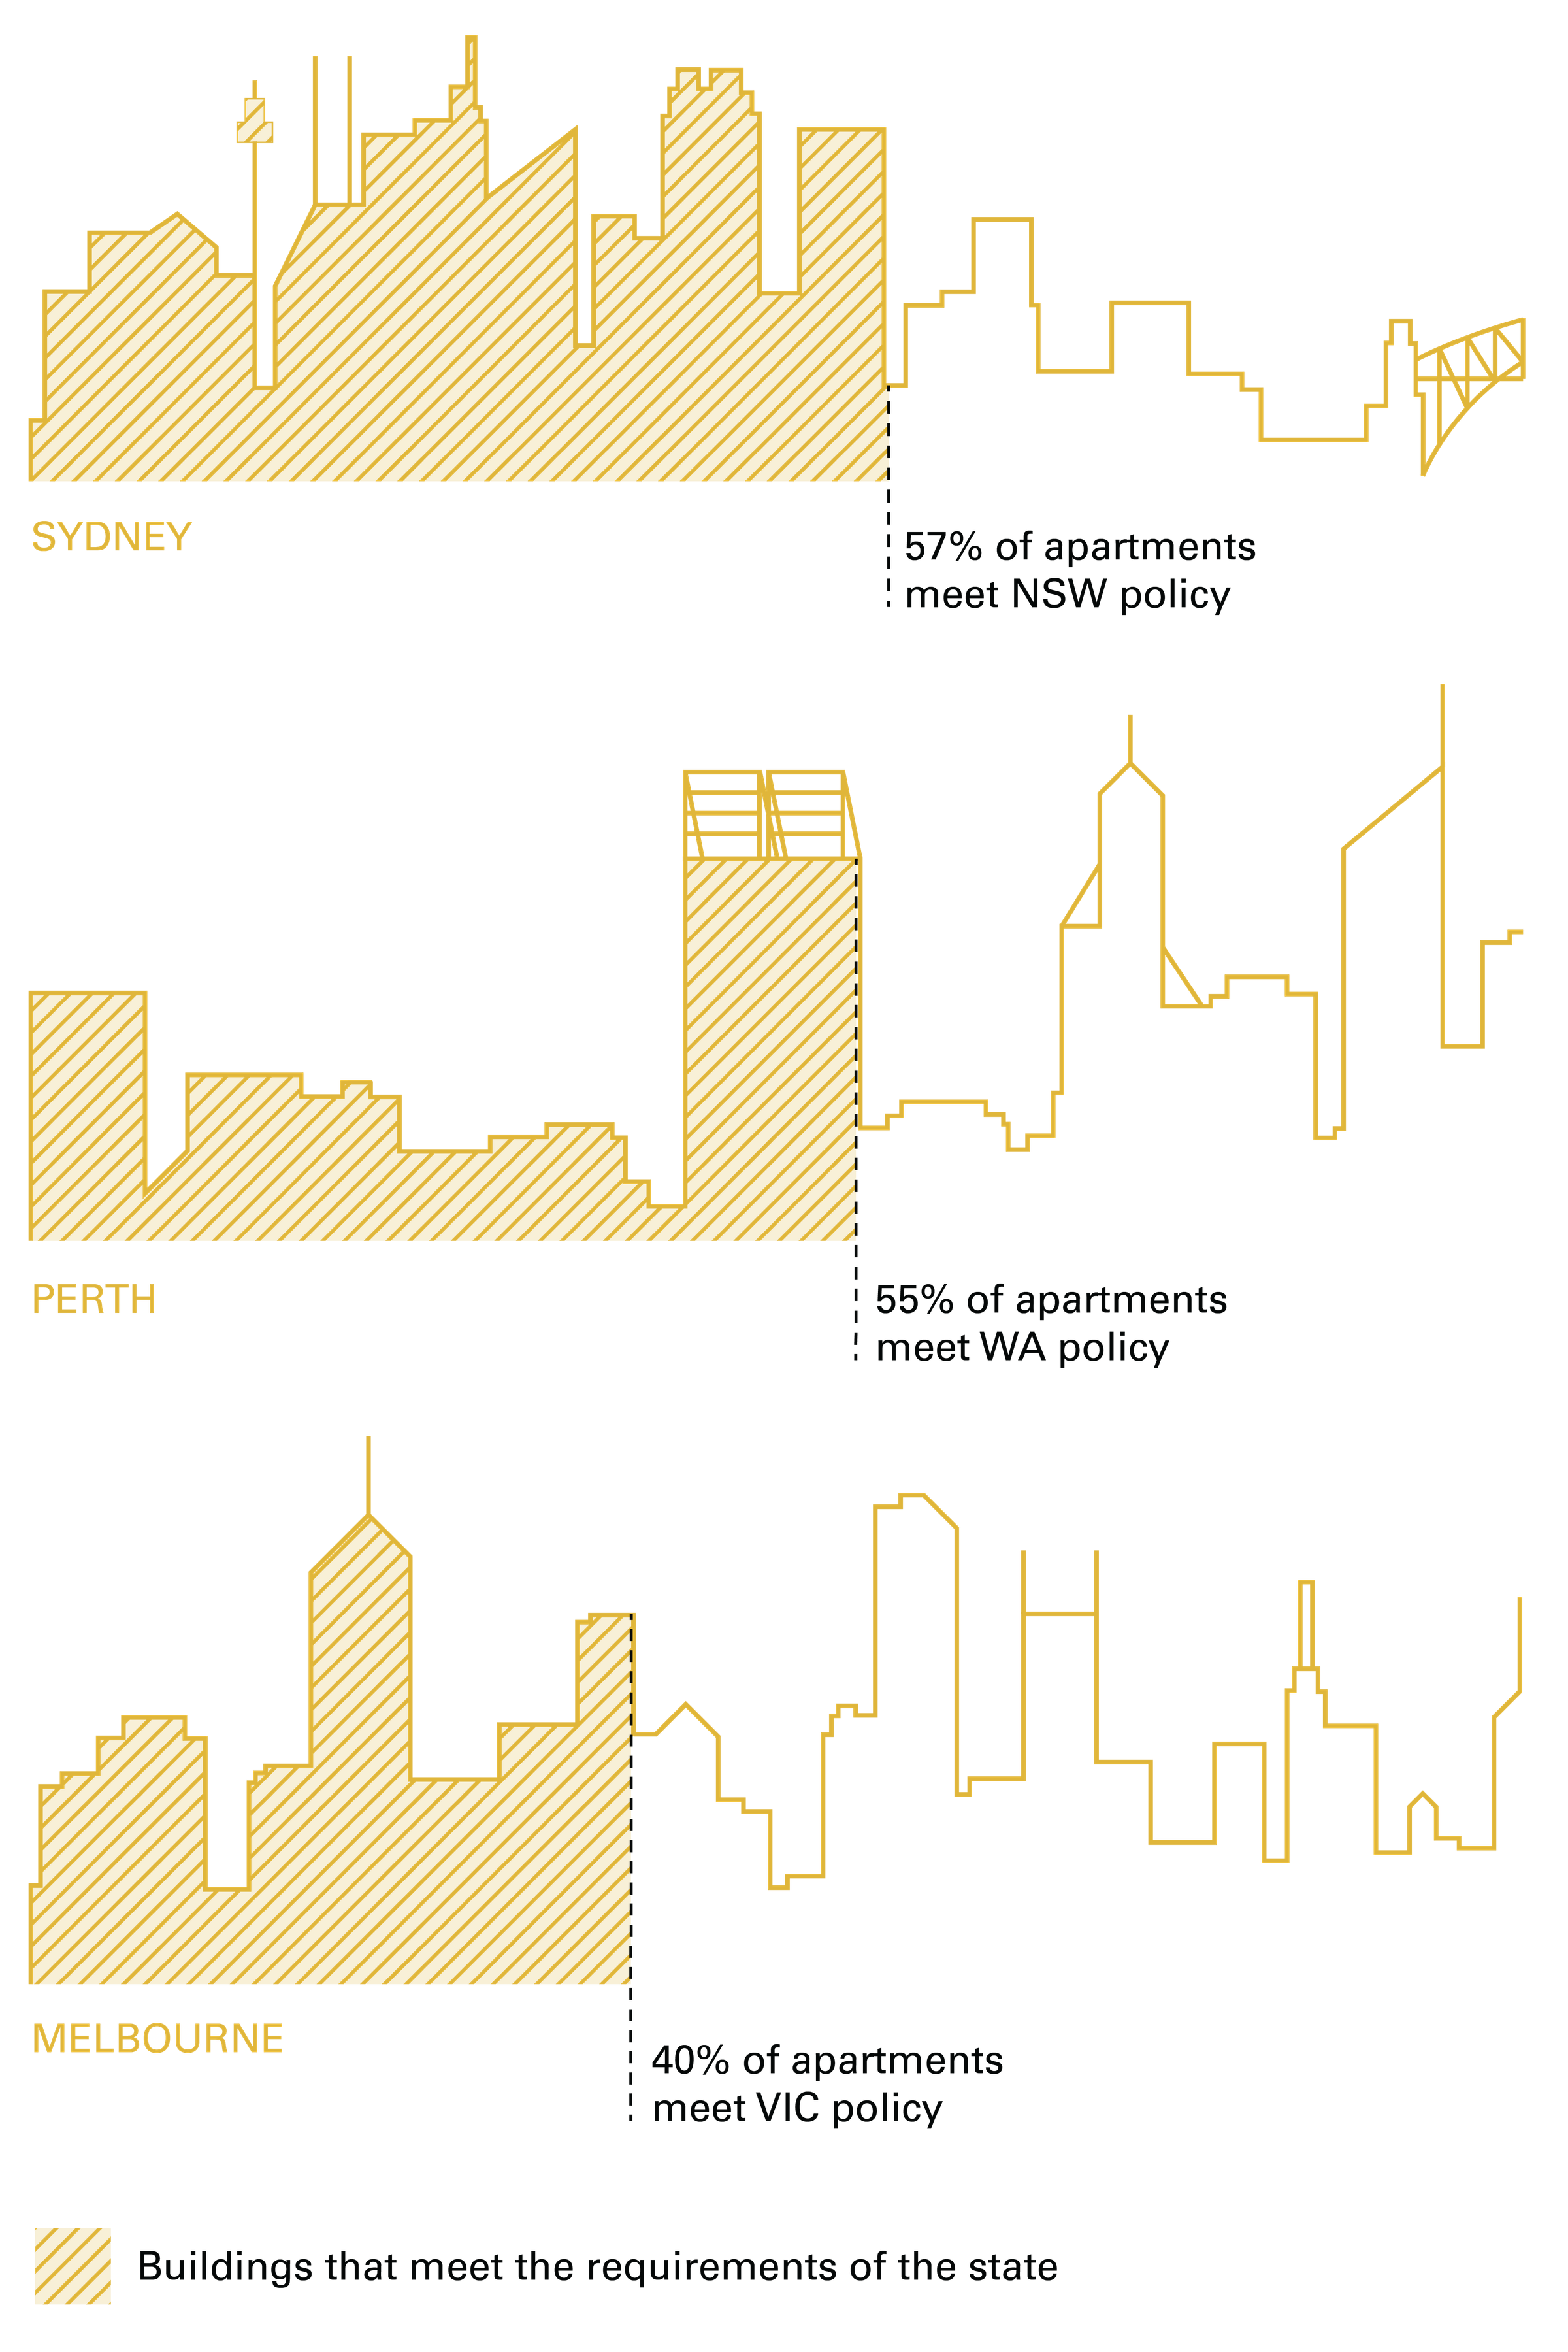 Diagram showing the skyline of Sydney, Perth and Melbourne and the percentages of buildings that comply with each of the cities policies and all policies combined. In Sydney, 57% of buildings meet SEPP65 policy and 60% of buildings meet all policy requirements. In Perth, 55% of buildings meet SPP7.3 policy and 55% of buildings meet all policy requirements. In Melbourne, 40% of buildings meet BADS policy requirements and 43% of buildings meet all policy requirements.